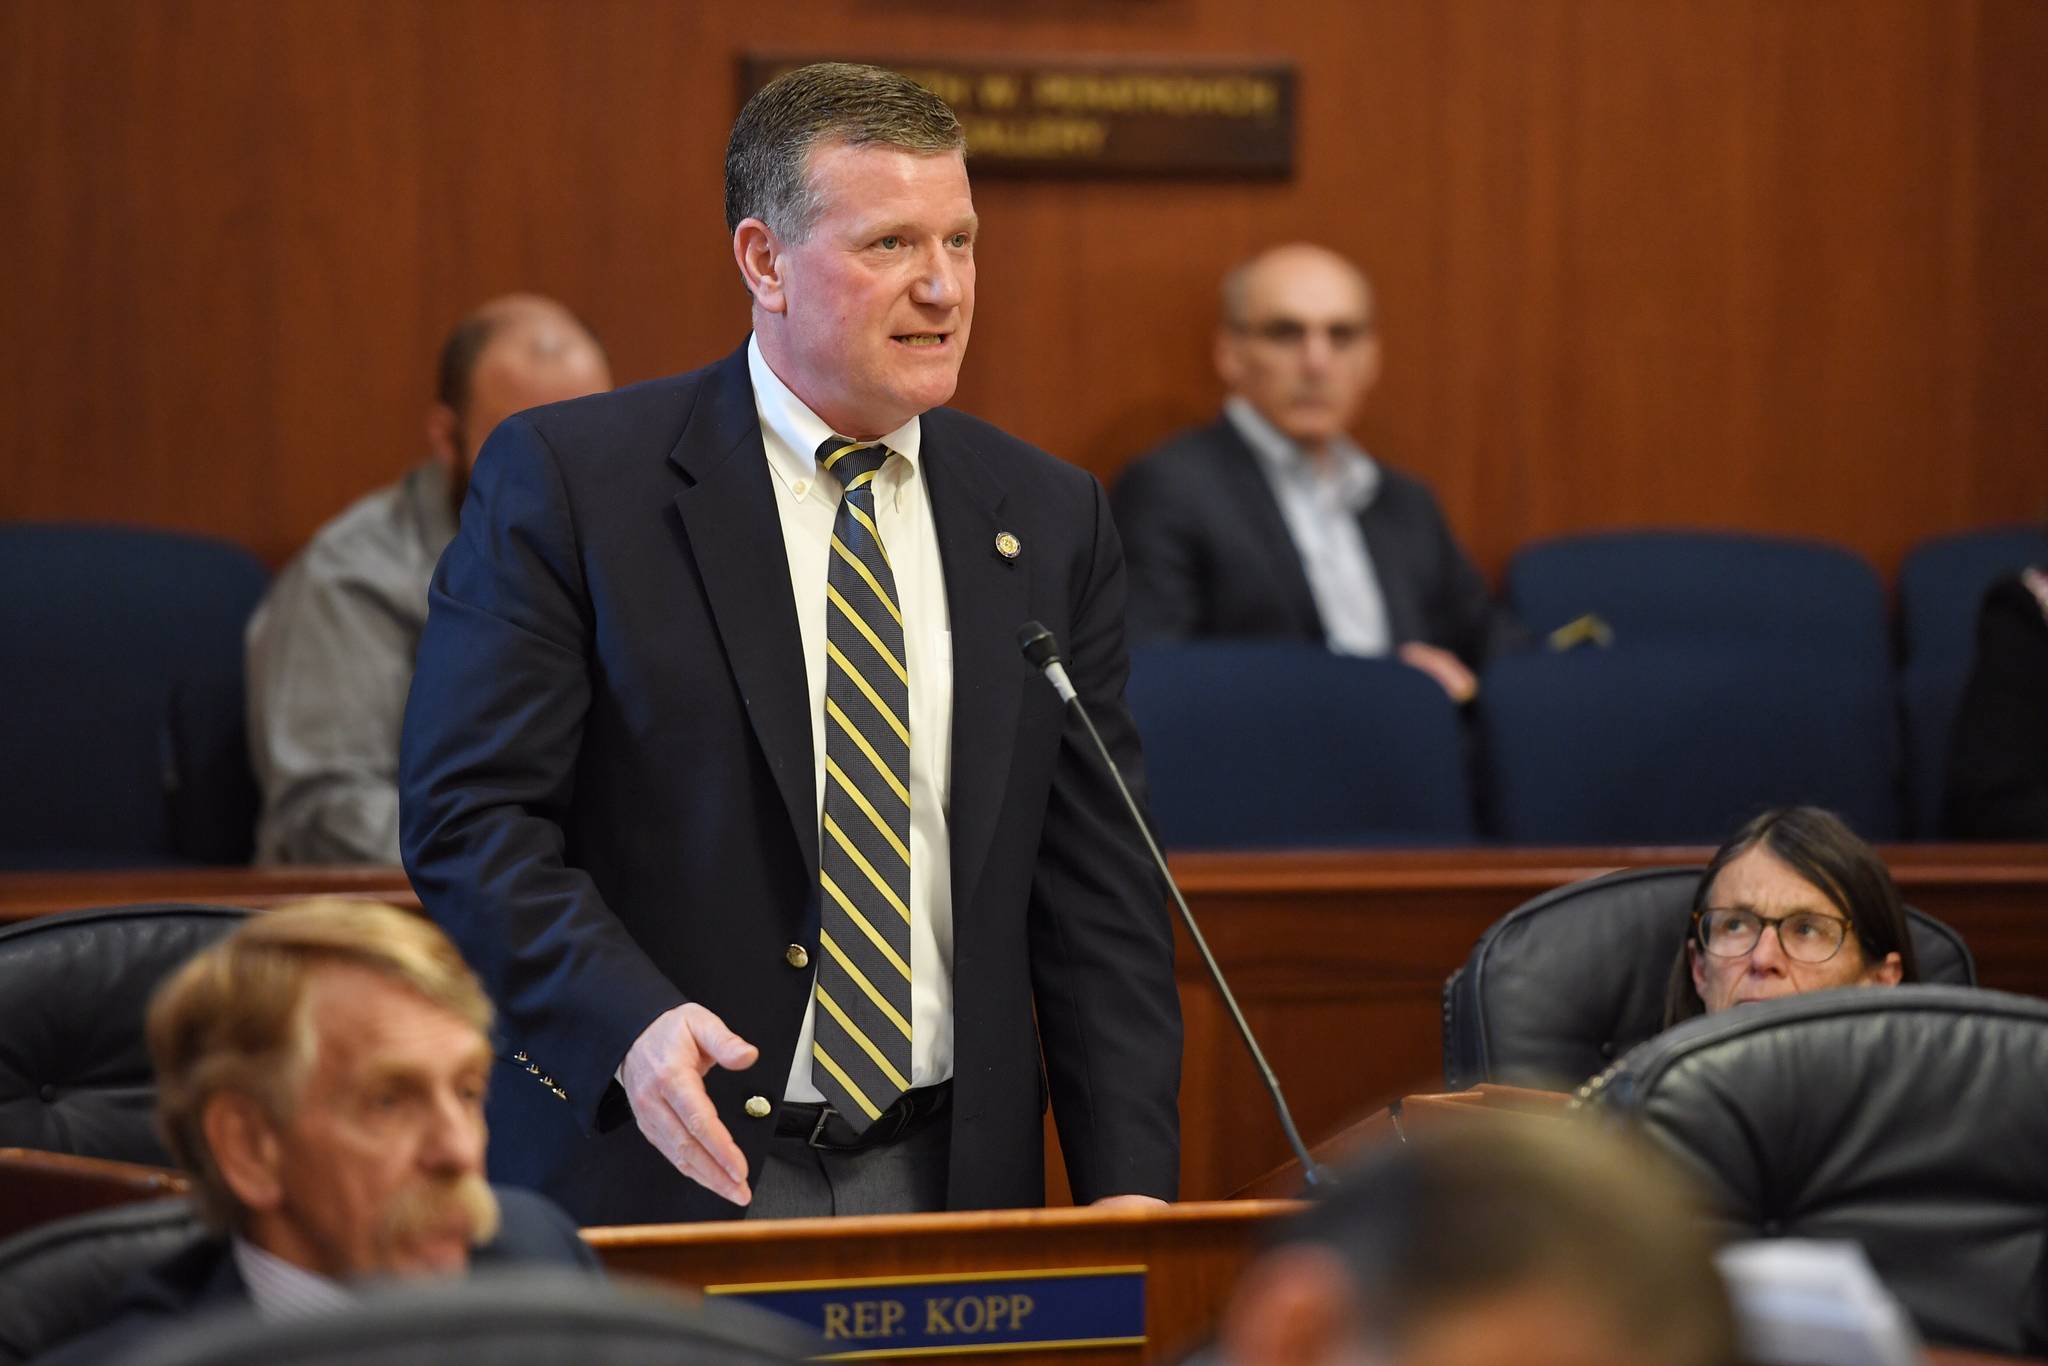 Rep. Chuck Kopp, R-Anchorage, speaks against concurring with the senate crime bill at the Capitol on Tuesday, May 14, 2019. (Michael Penn | Juneau Empire)